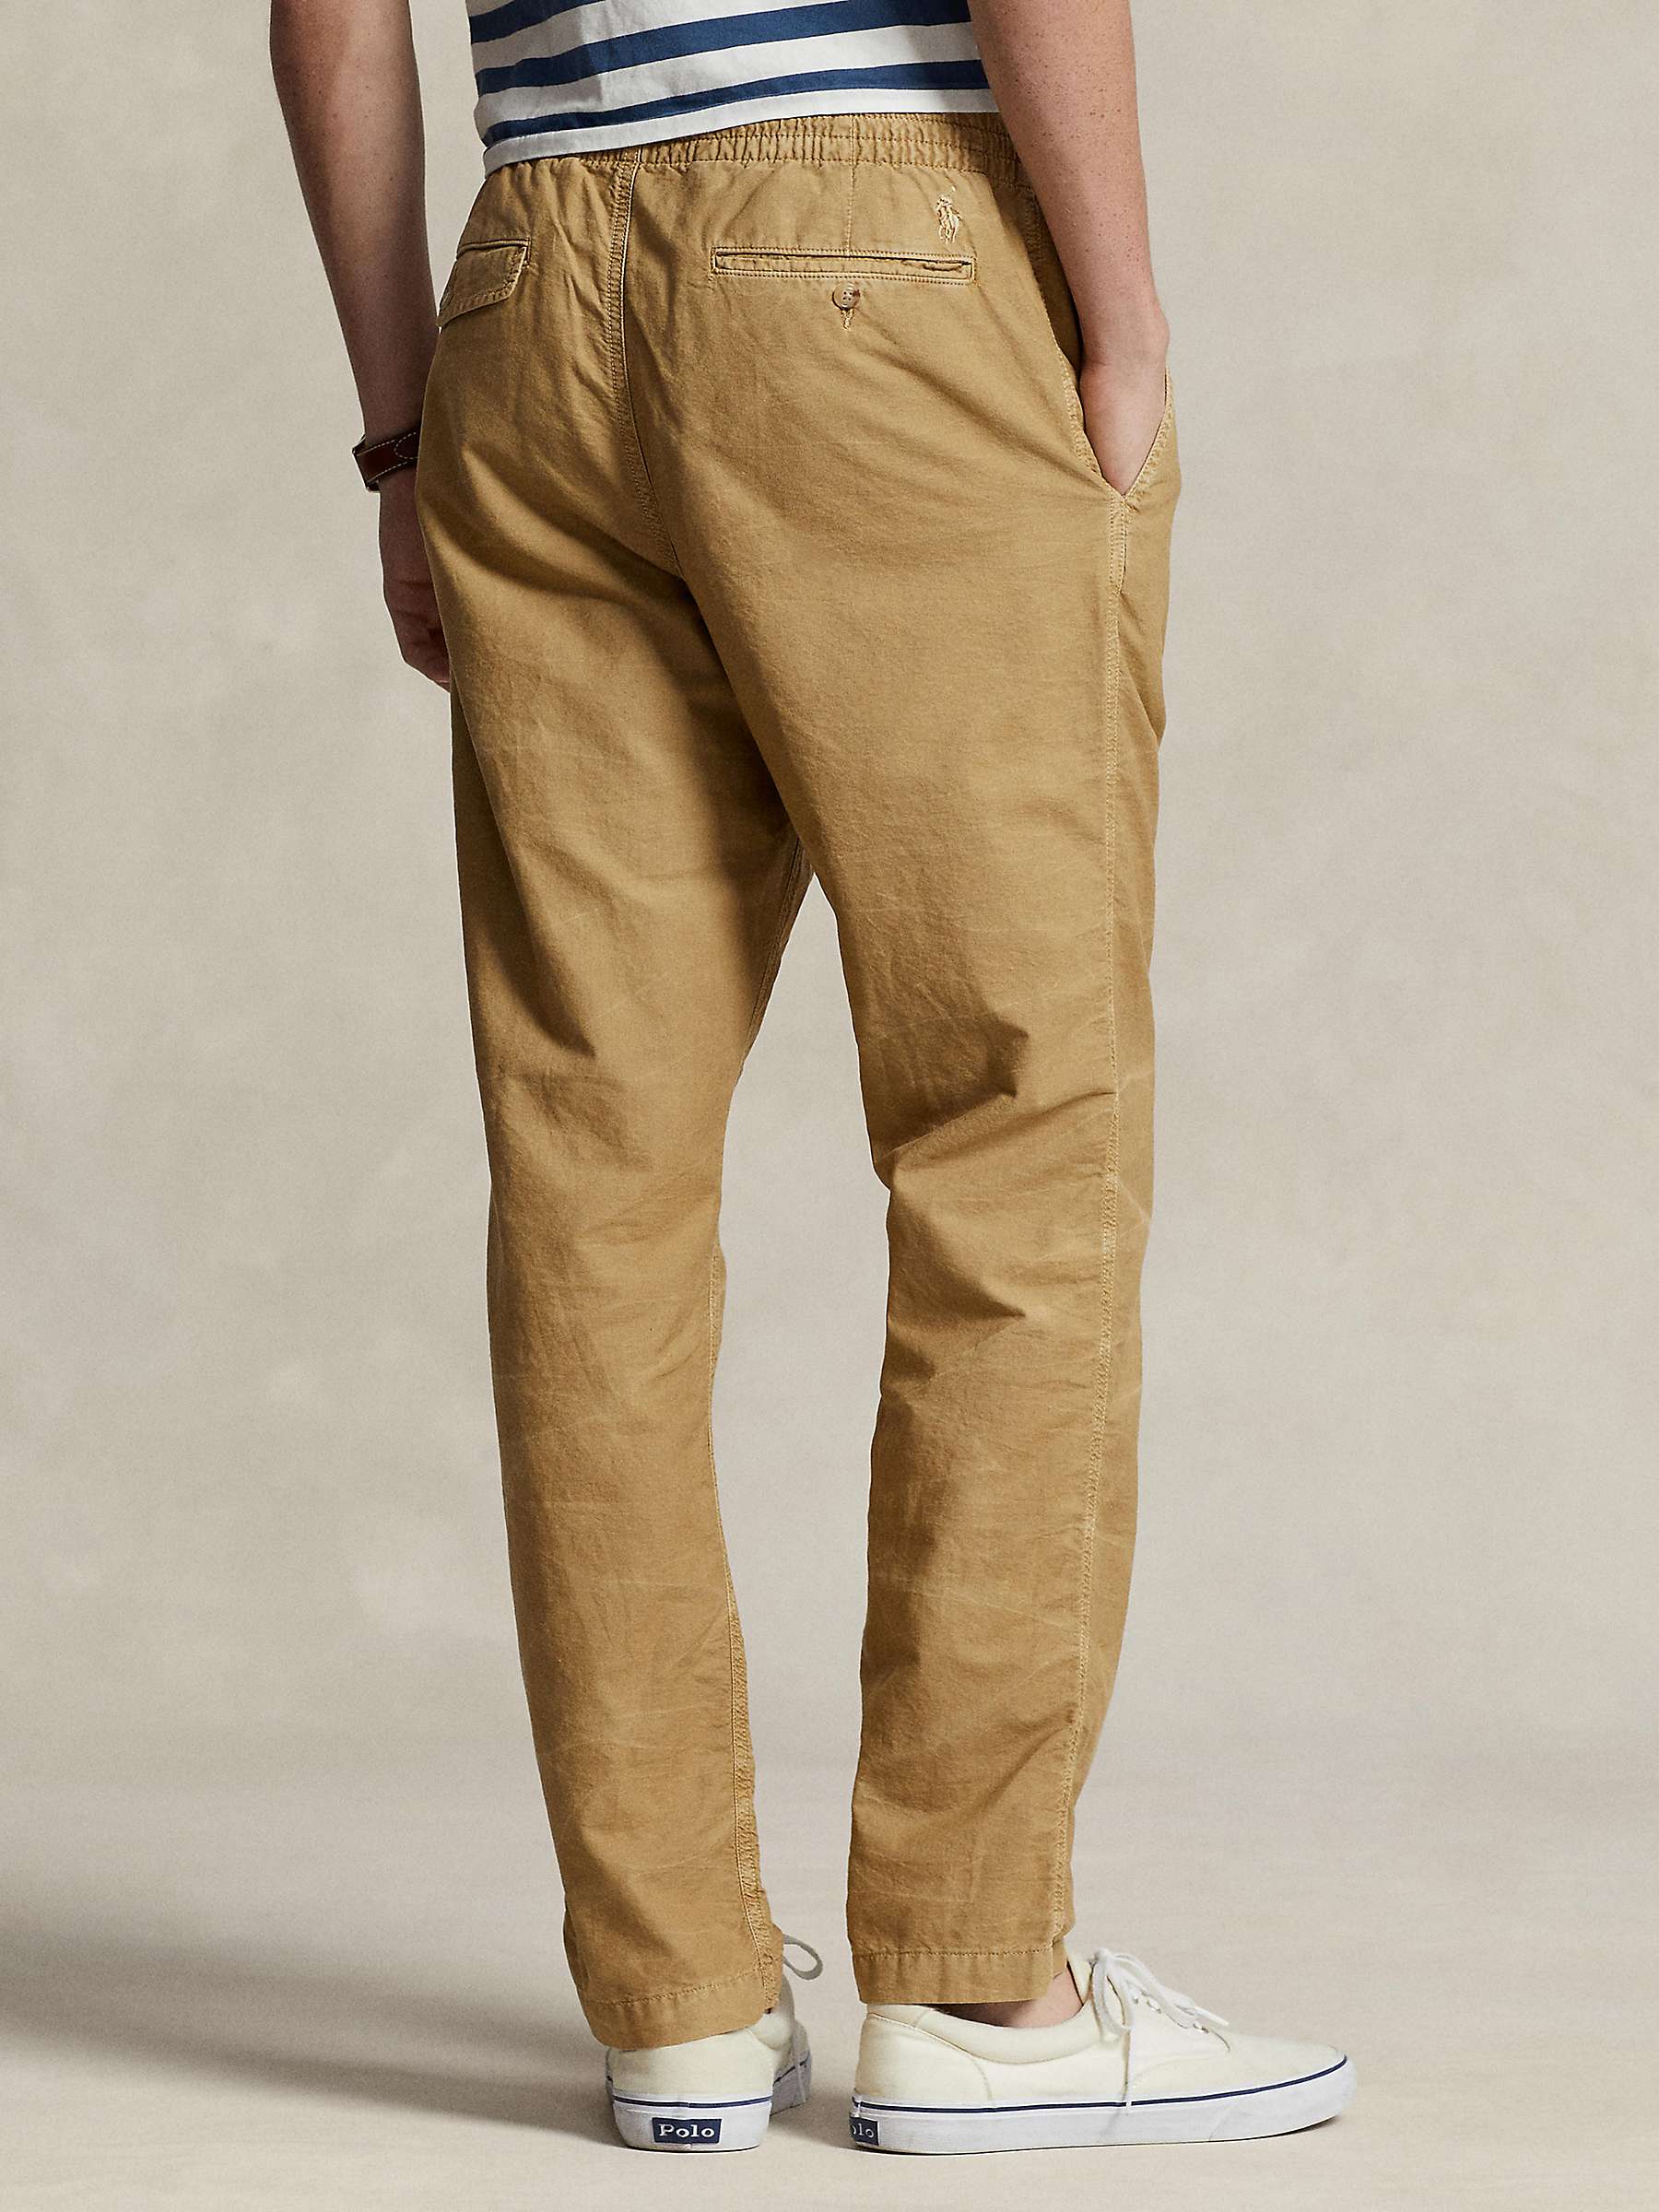 Buy Ralph Lauren Polo Prepster Classic Fit Oxford Trousers Online at johnlewis.com